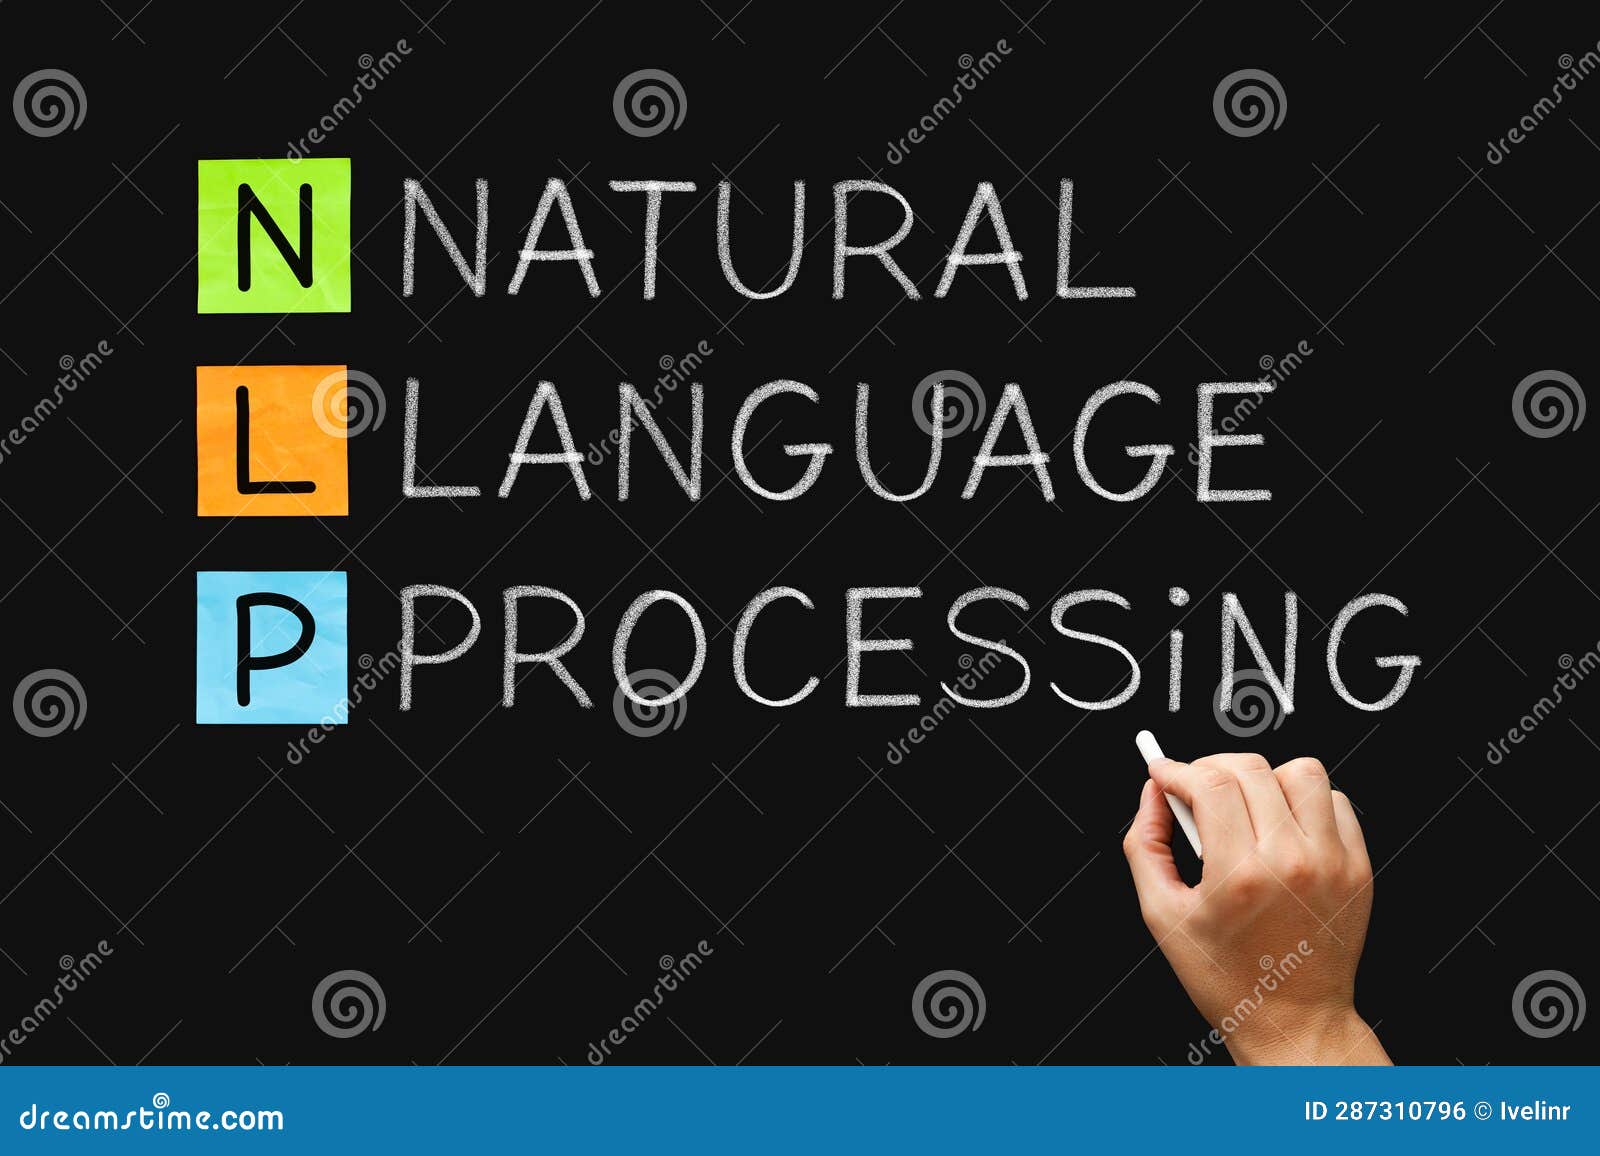 nlp - natural language processing ai artificial intelligence concept